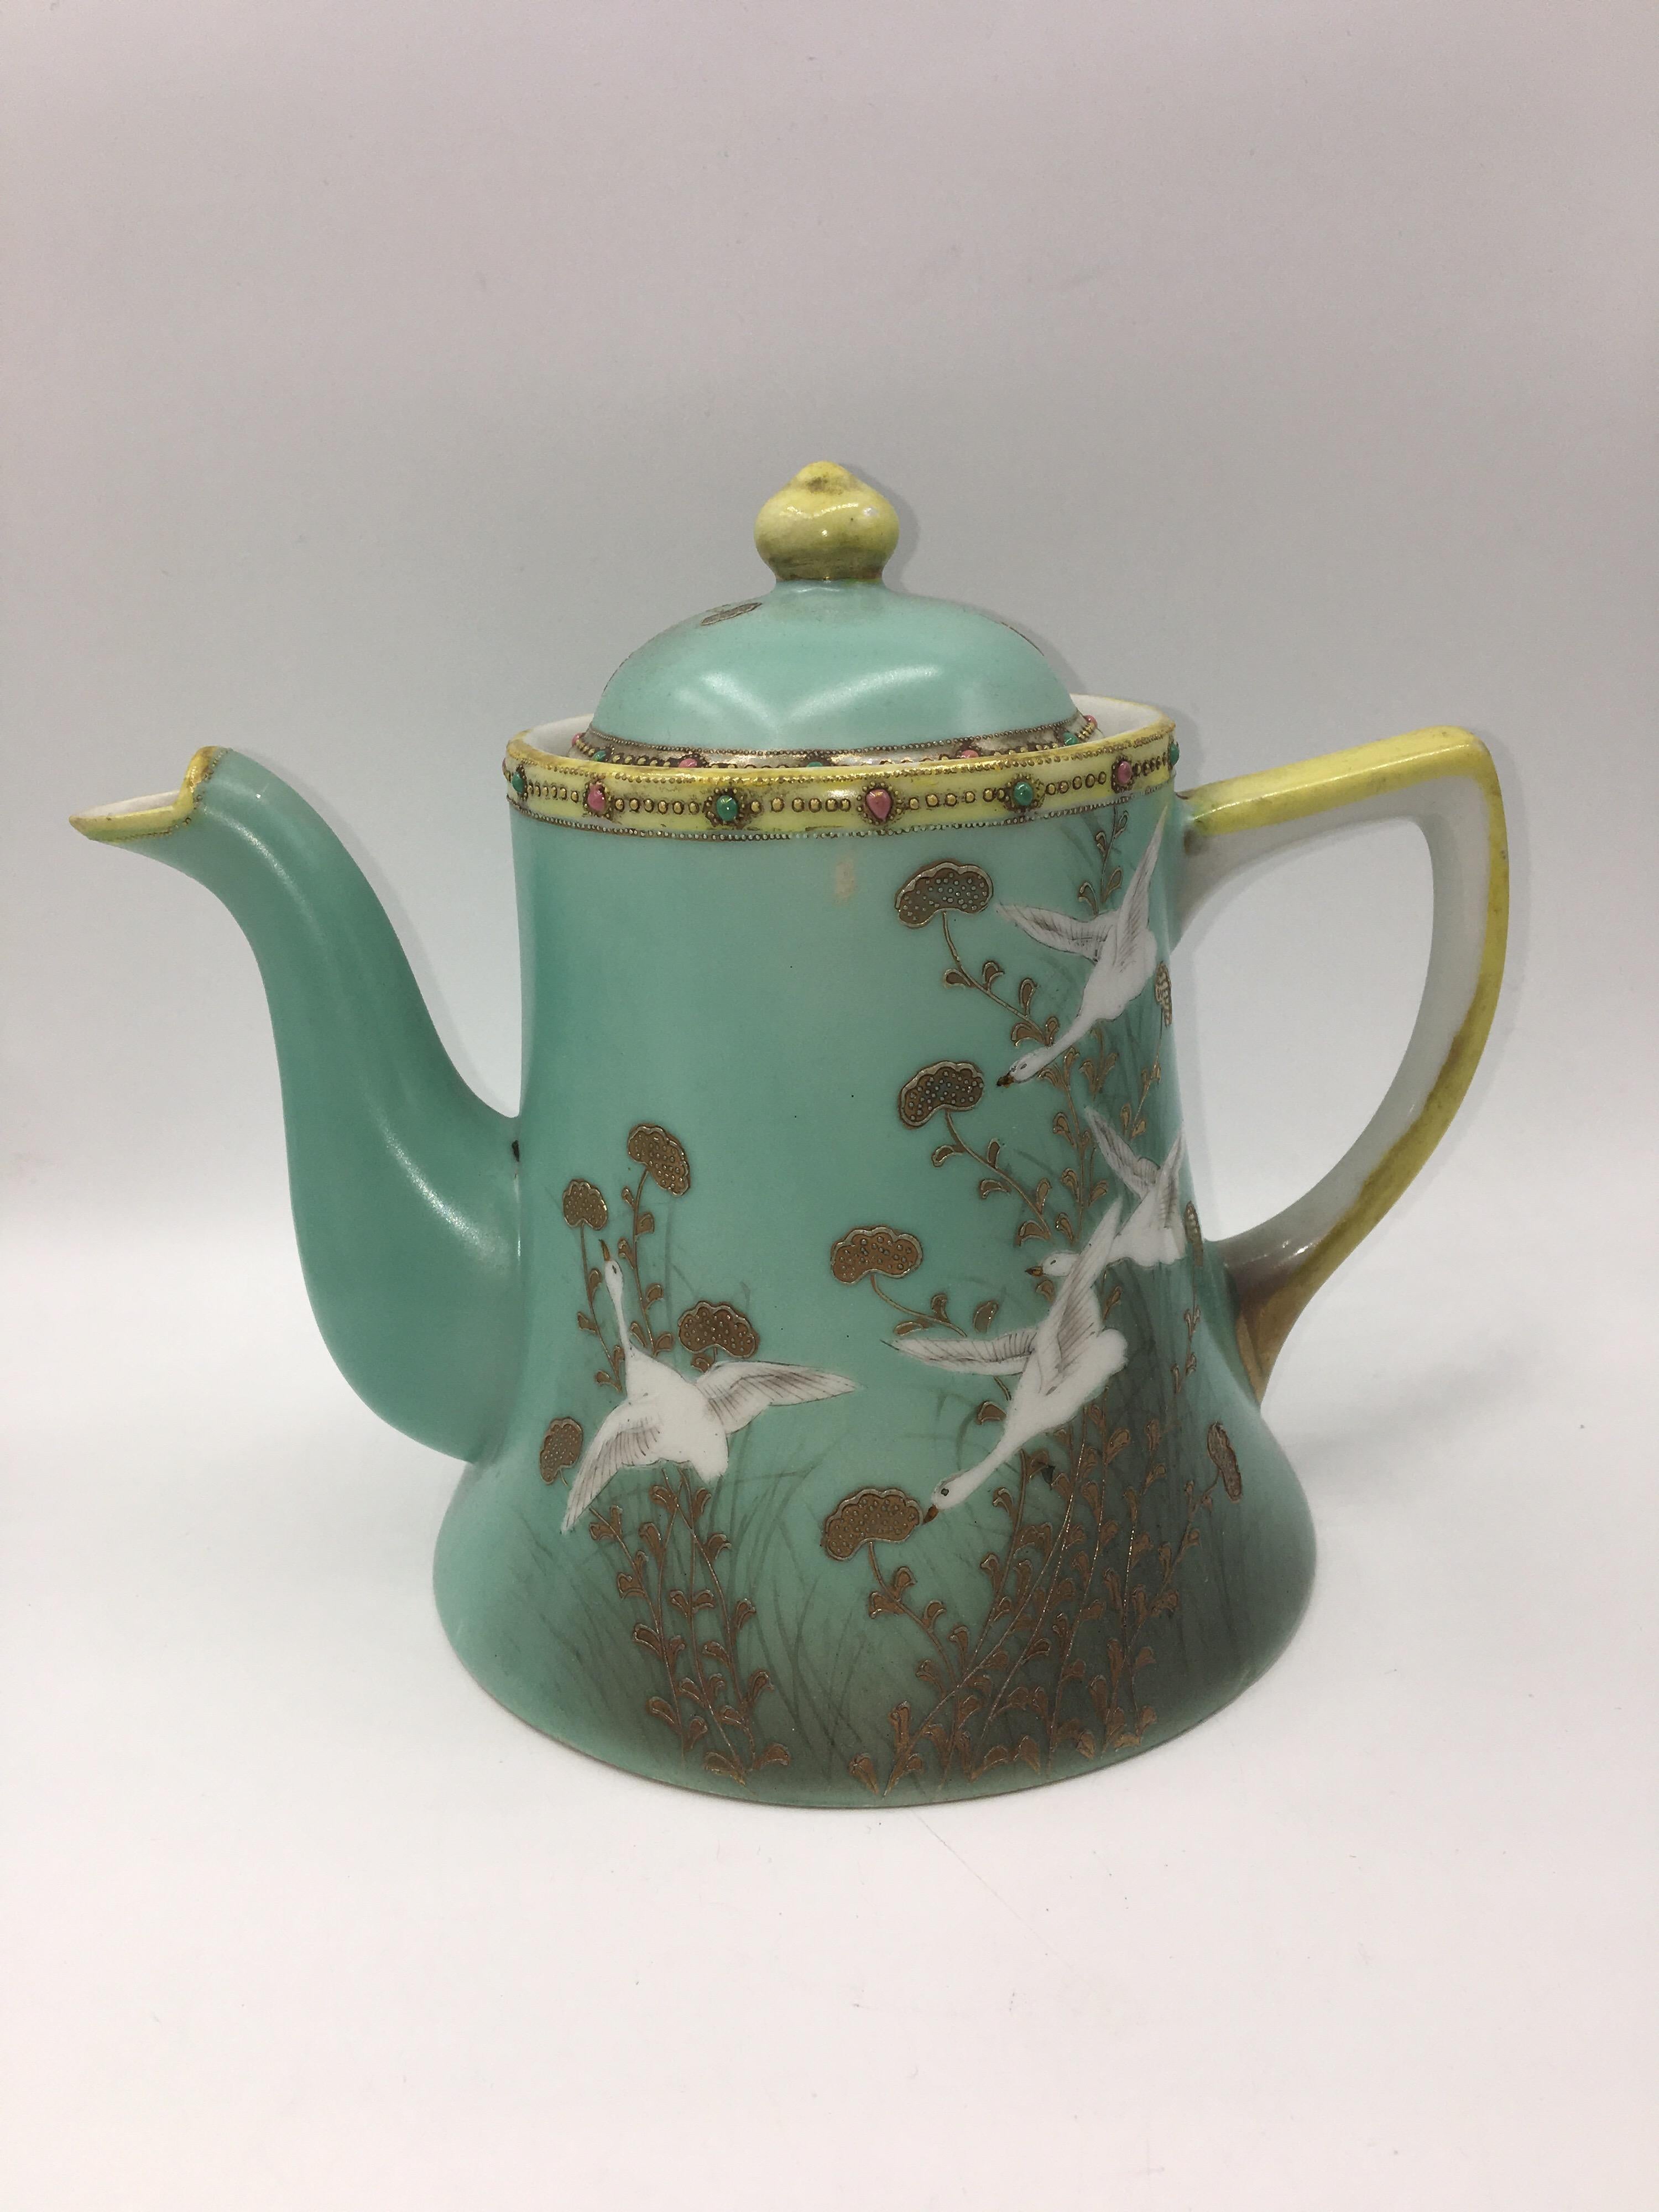 Beautiful hand painted green Japanese tea set with embossed details, from the 1950s.